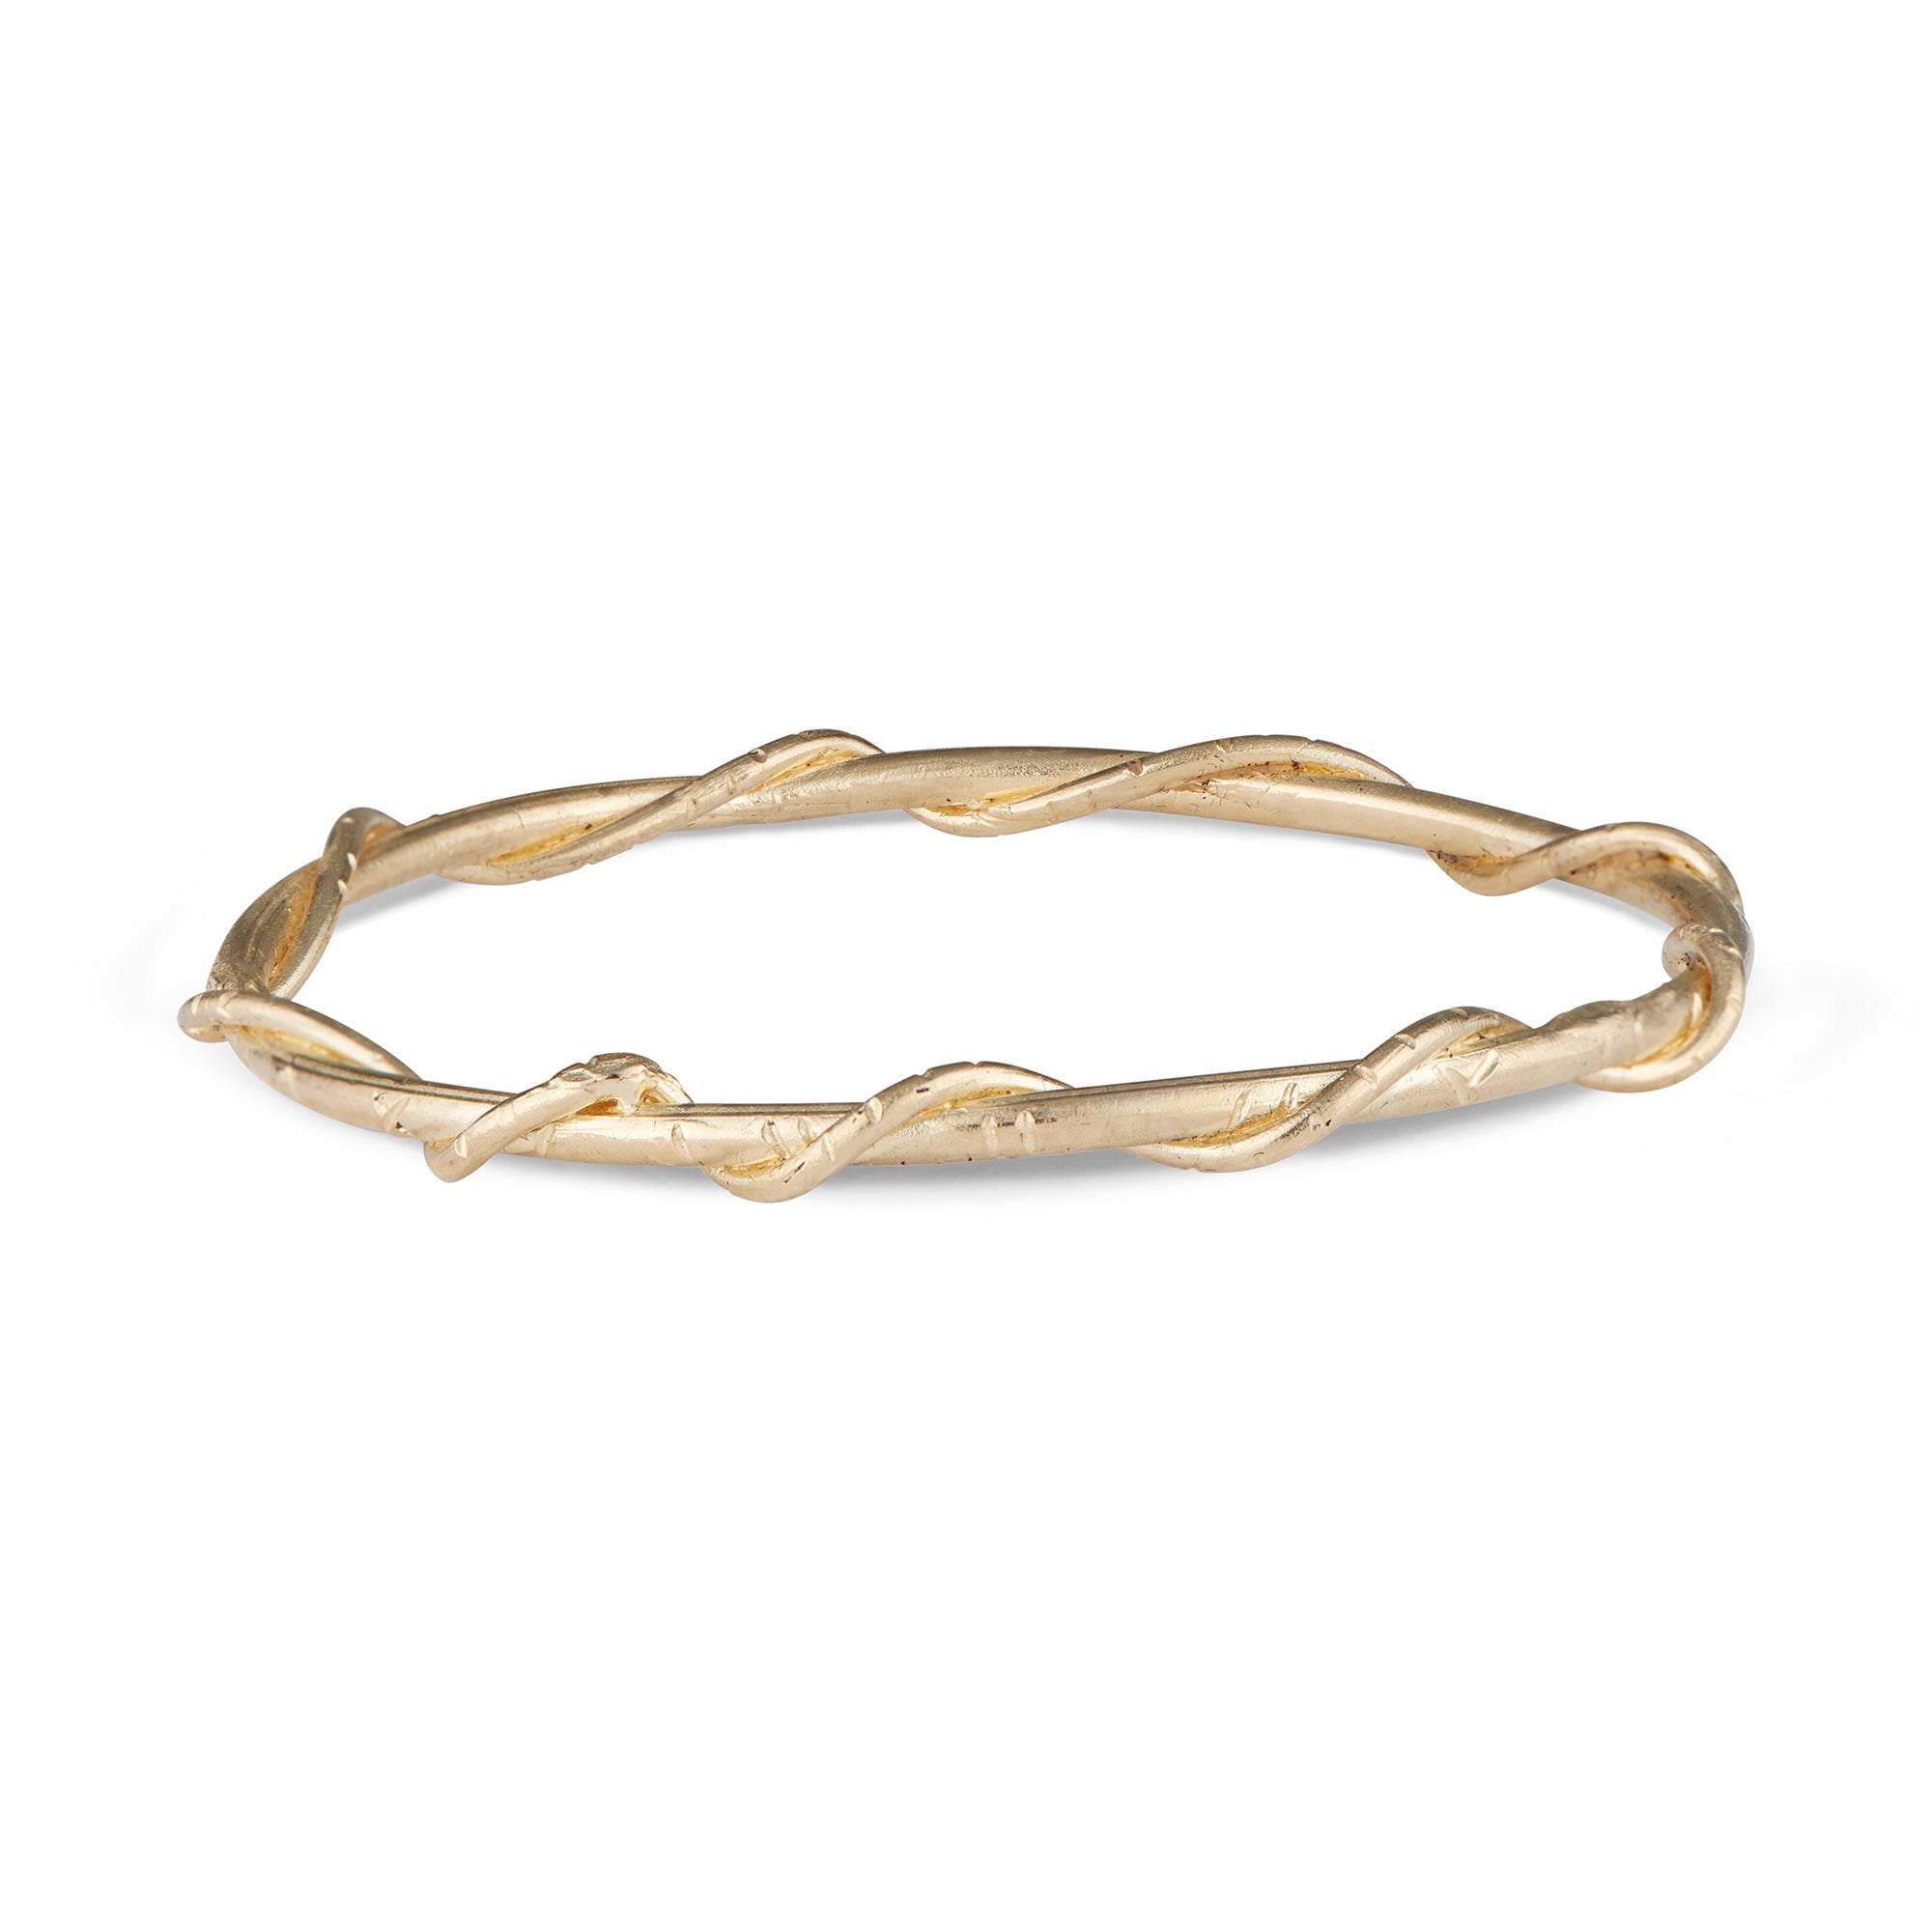 The Natalie McMillan 14k Gold Marina Bangle is a beautiful sculpturesque piece of jewelry that is sure to be on your wrist for years to come.